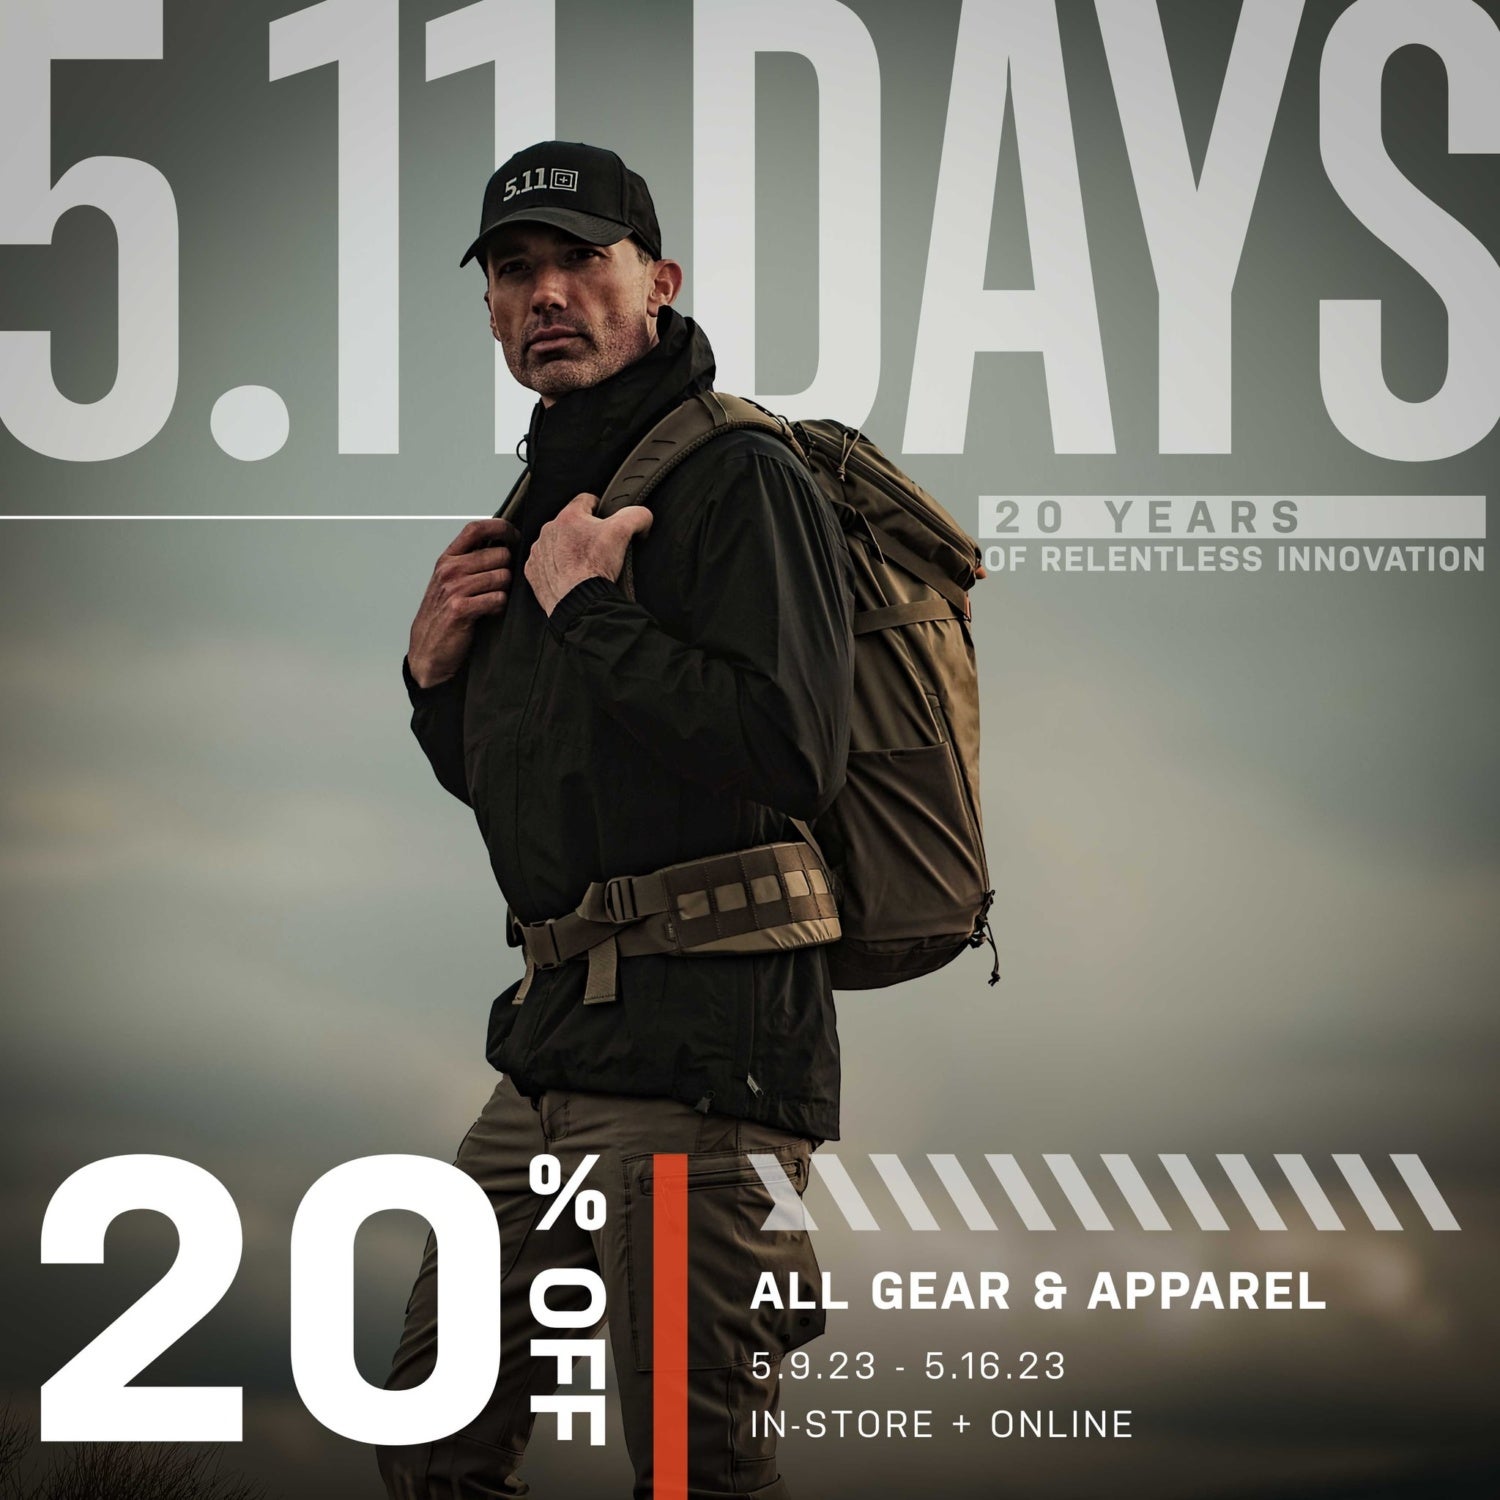 Join the Celebration: 5.11 Tactical's 20th Anniversary and 5.11 Days Event!